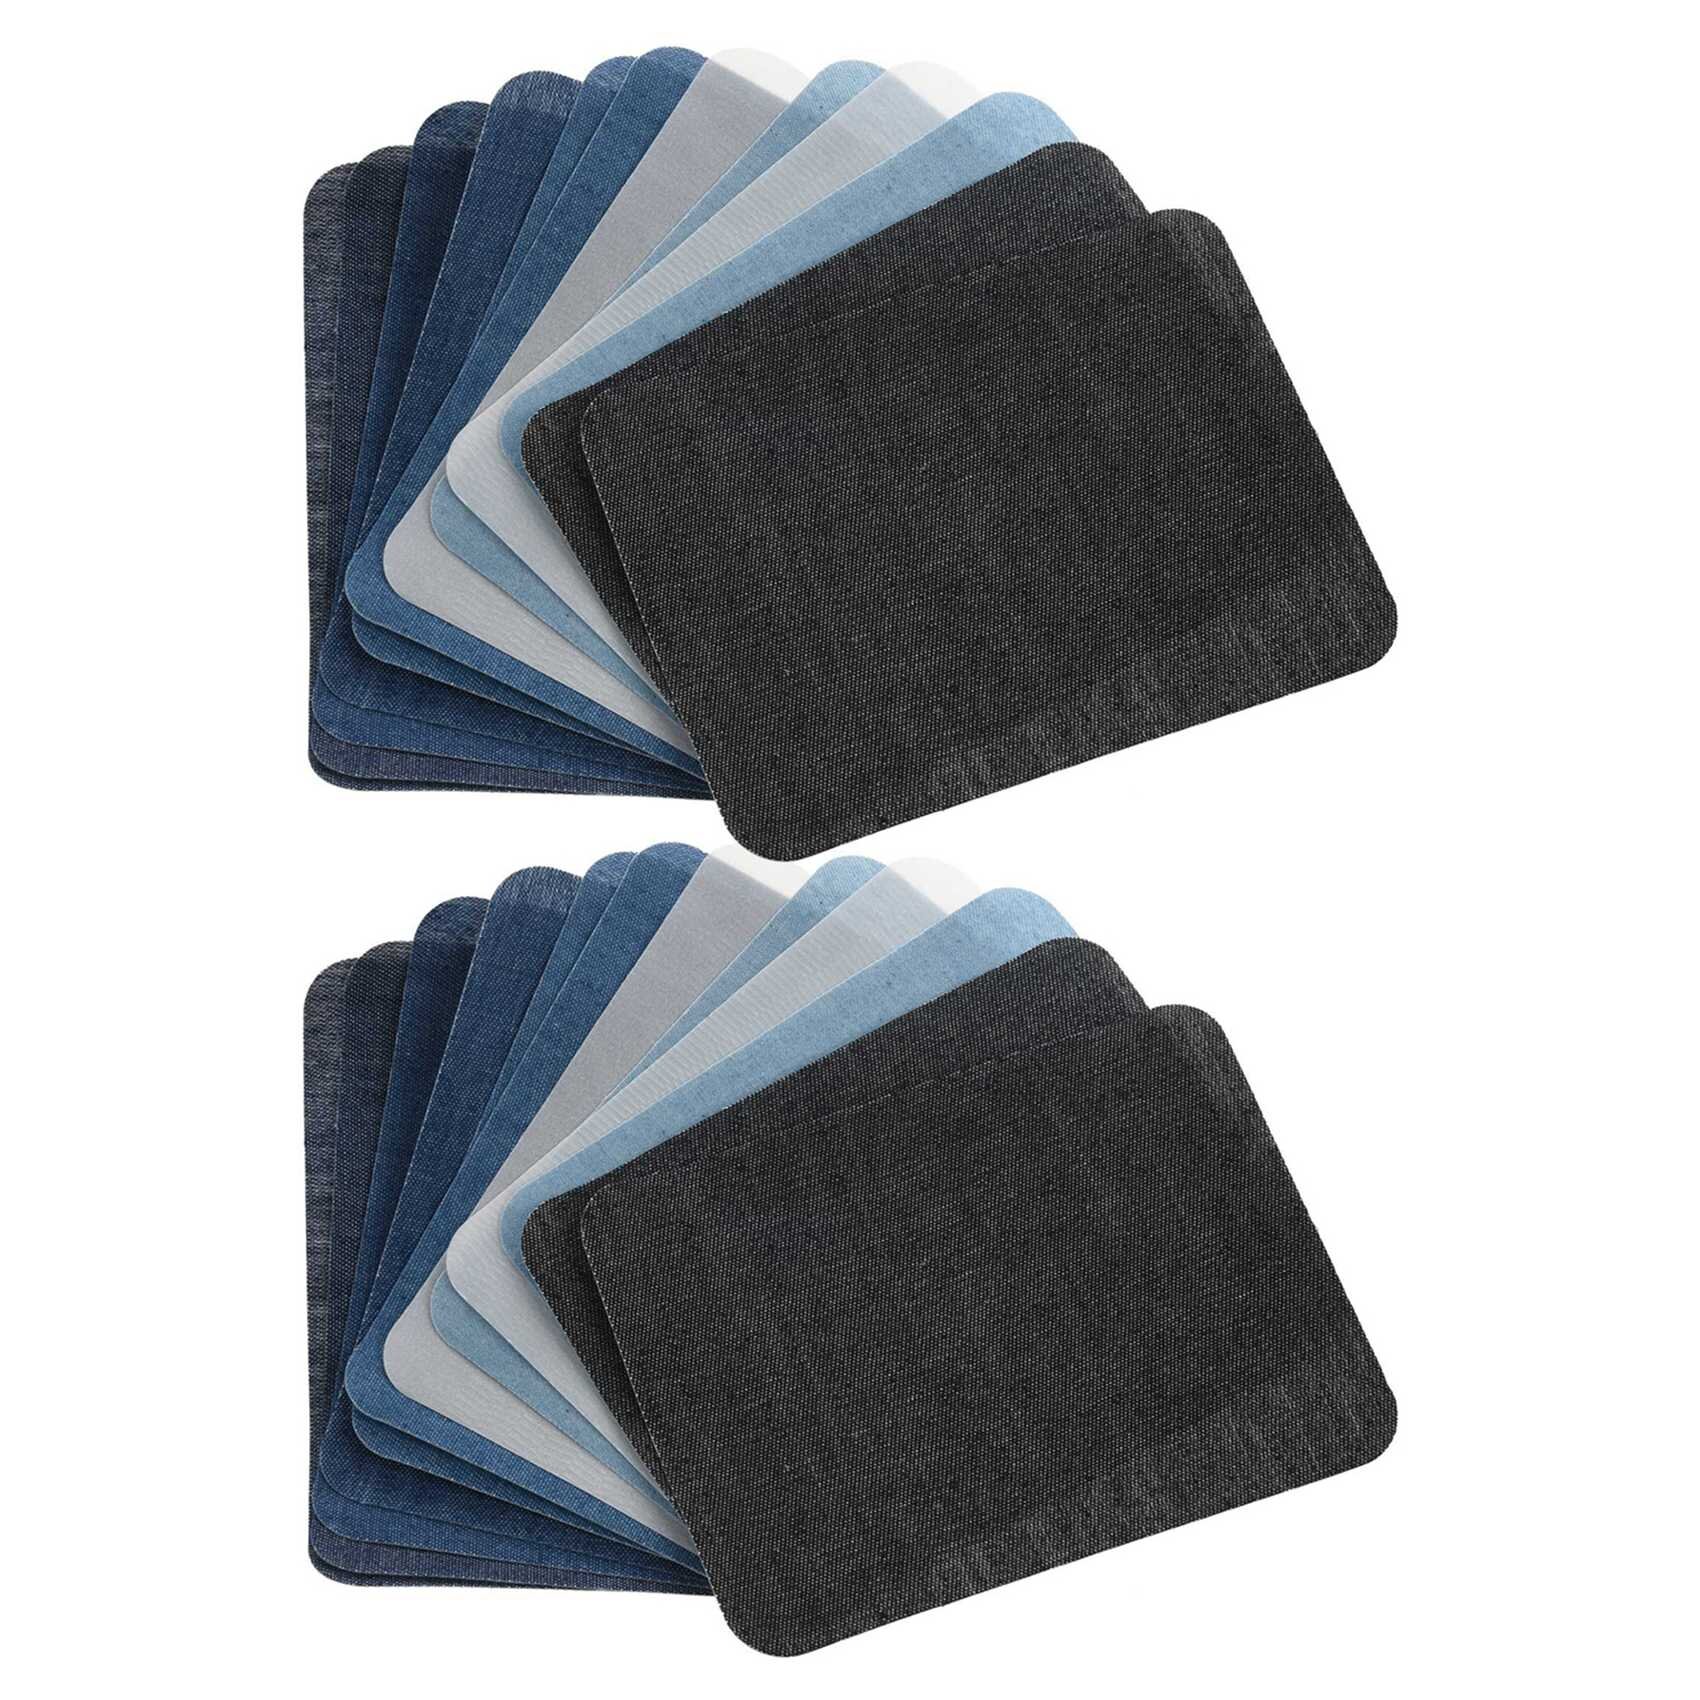 20Pcs Thermal Sticky Iron On Mending Patches Jeans Bag Hat Repair Decor Design